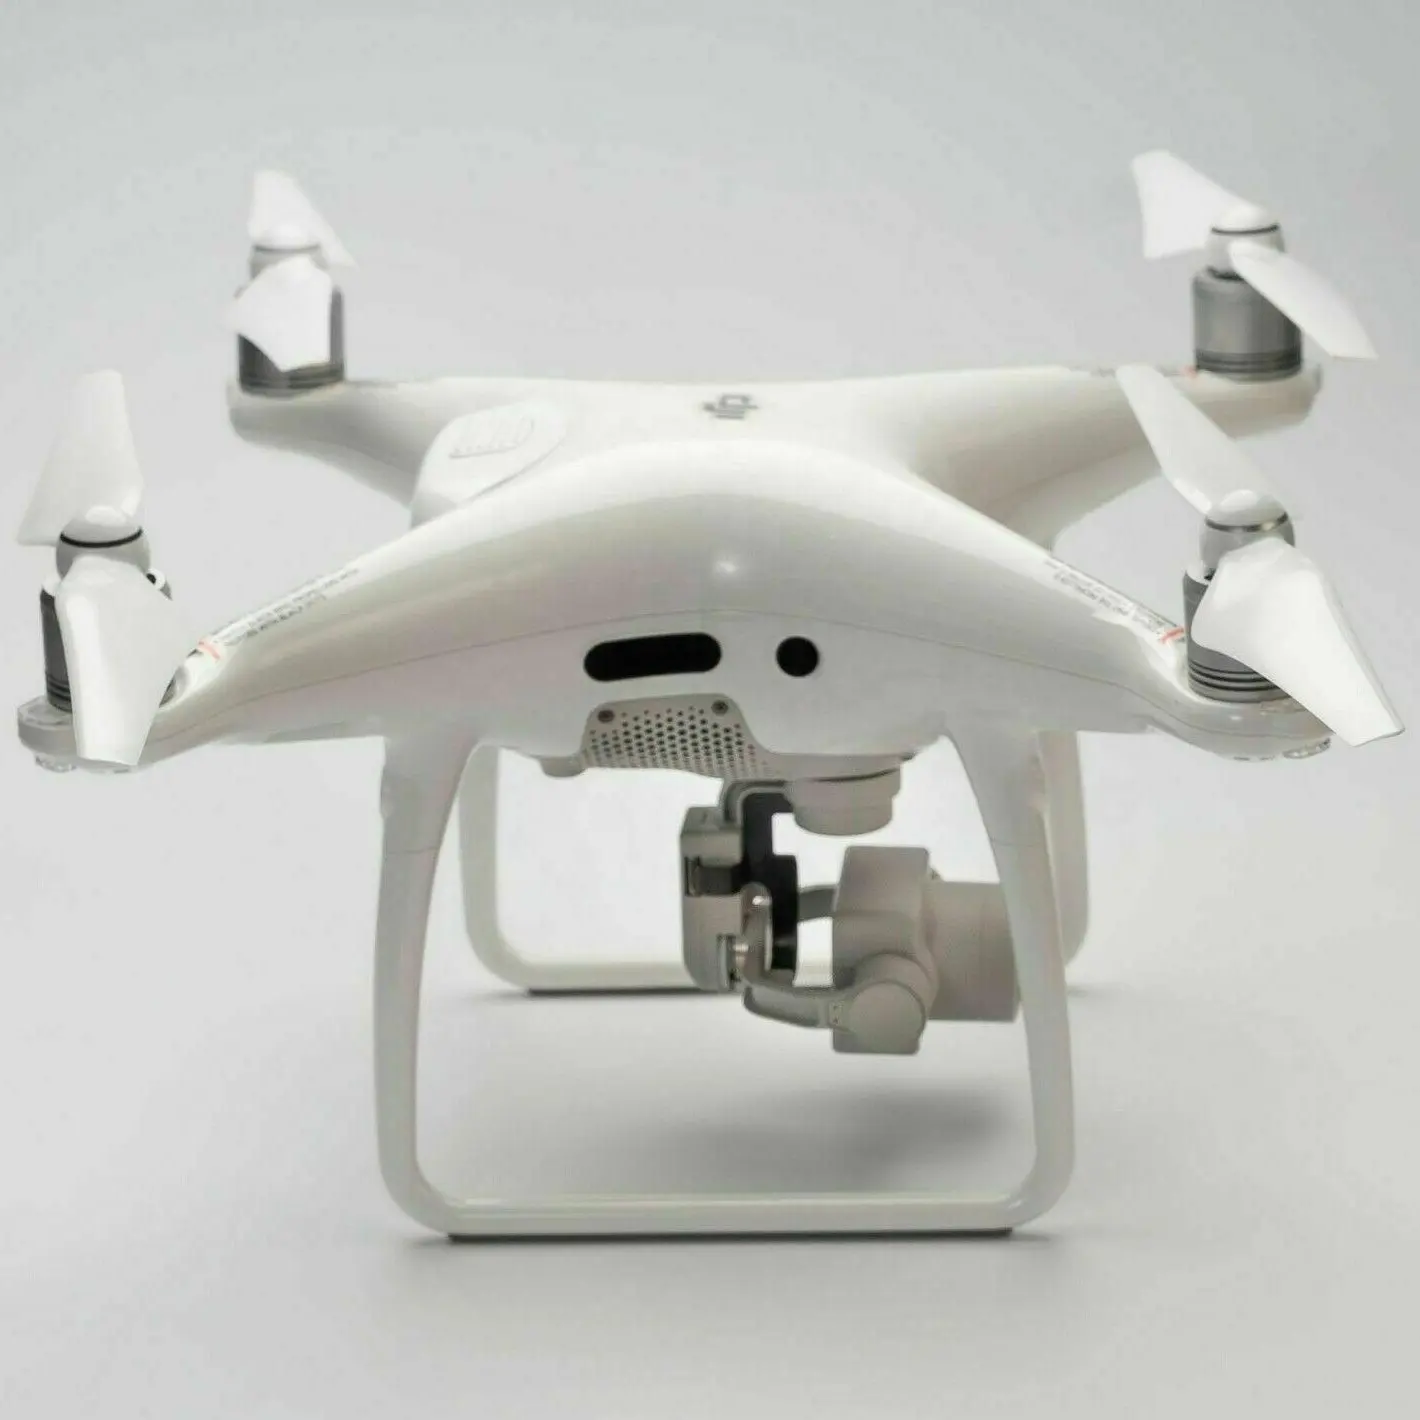 100% Original and Brand New Sealed for DJI PHANTOM 4 PRO 4K CAMERA DRONE READY TO FLY - 2.4 GHz/5.8 GHz FREQUENCY